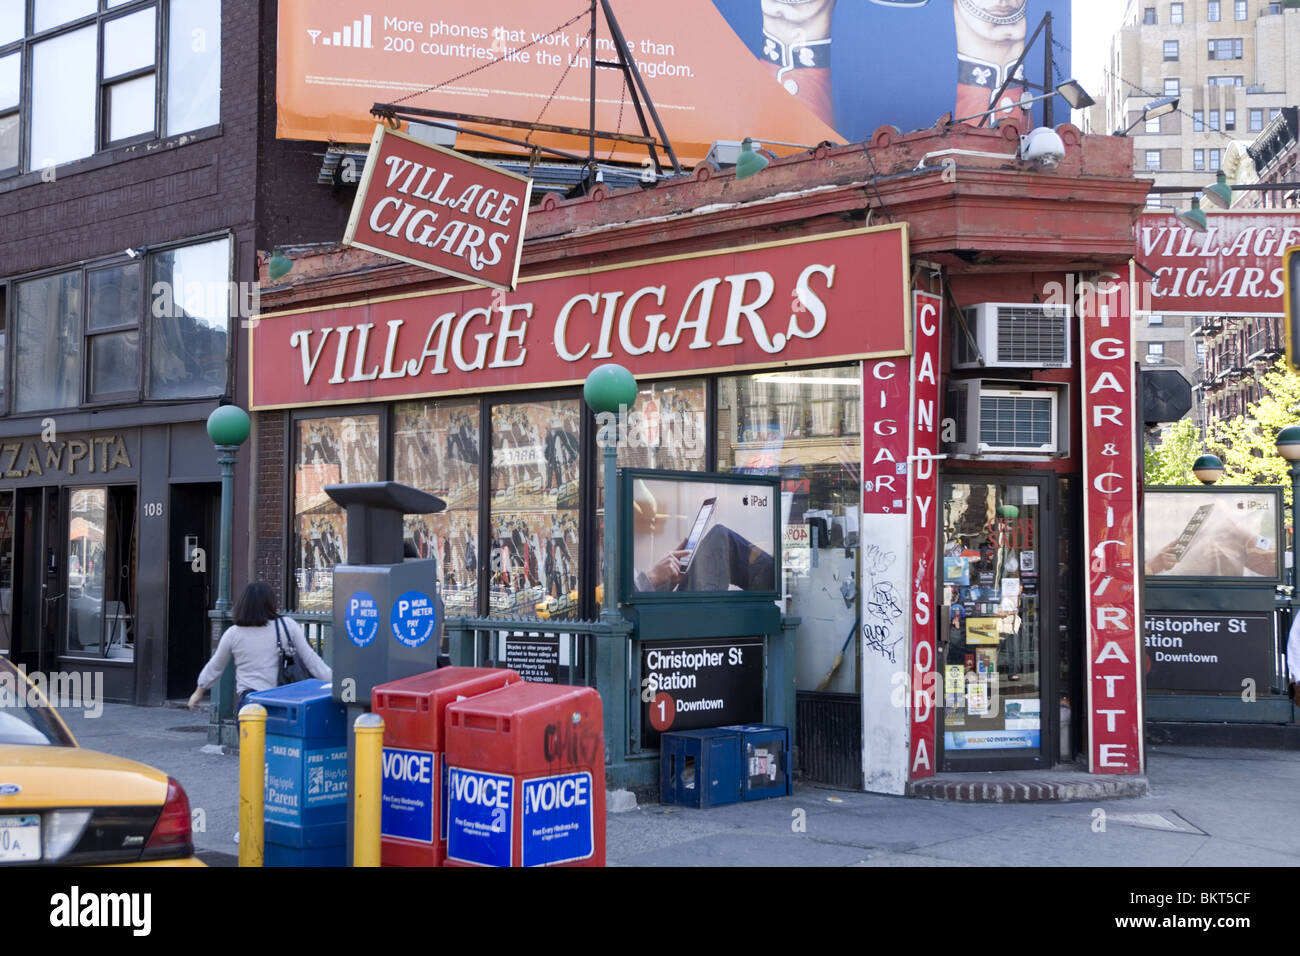 Village Cigars, a tobacco shop at the corner of 7th Ave. South and Christopher Street in Greenwich Village, NYC Stock Photo